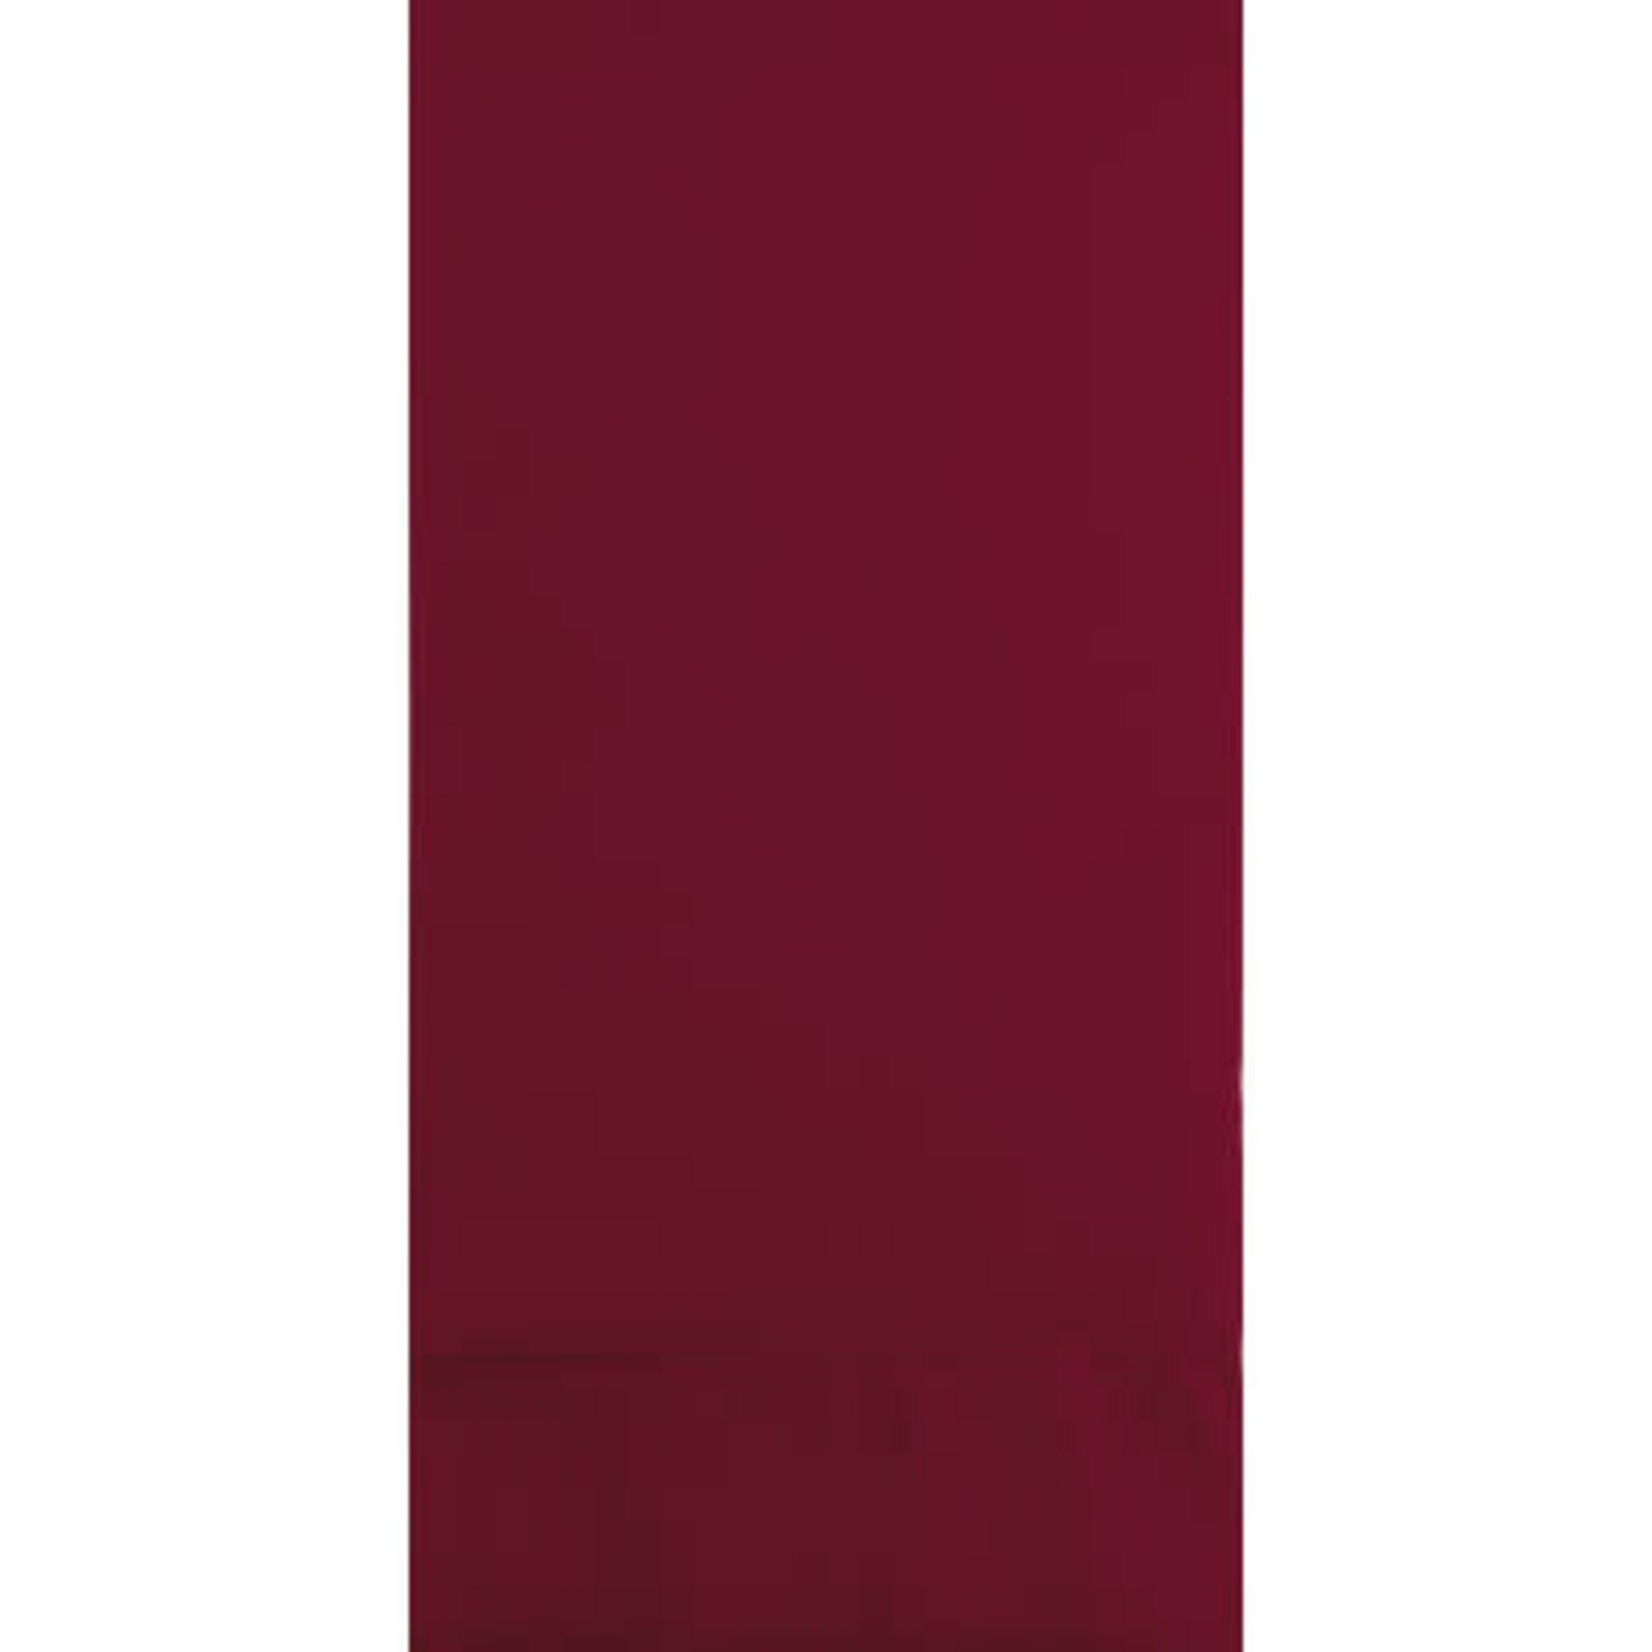 Touch of Color Burgundy 3-Ply Guest Towels - 16ct.